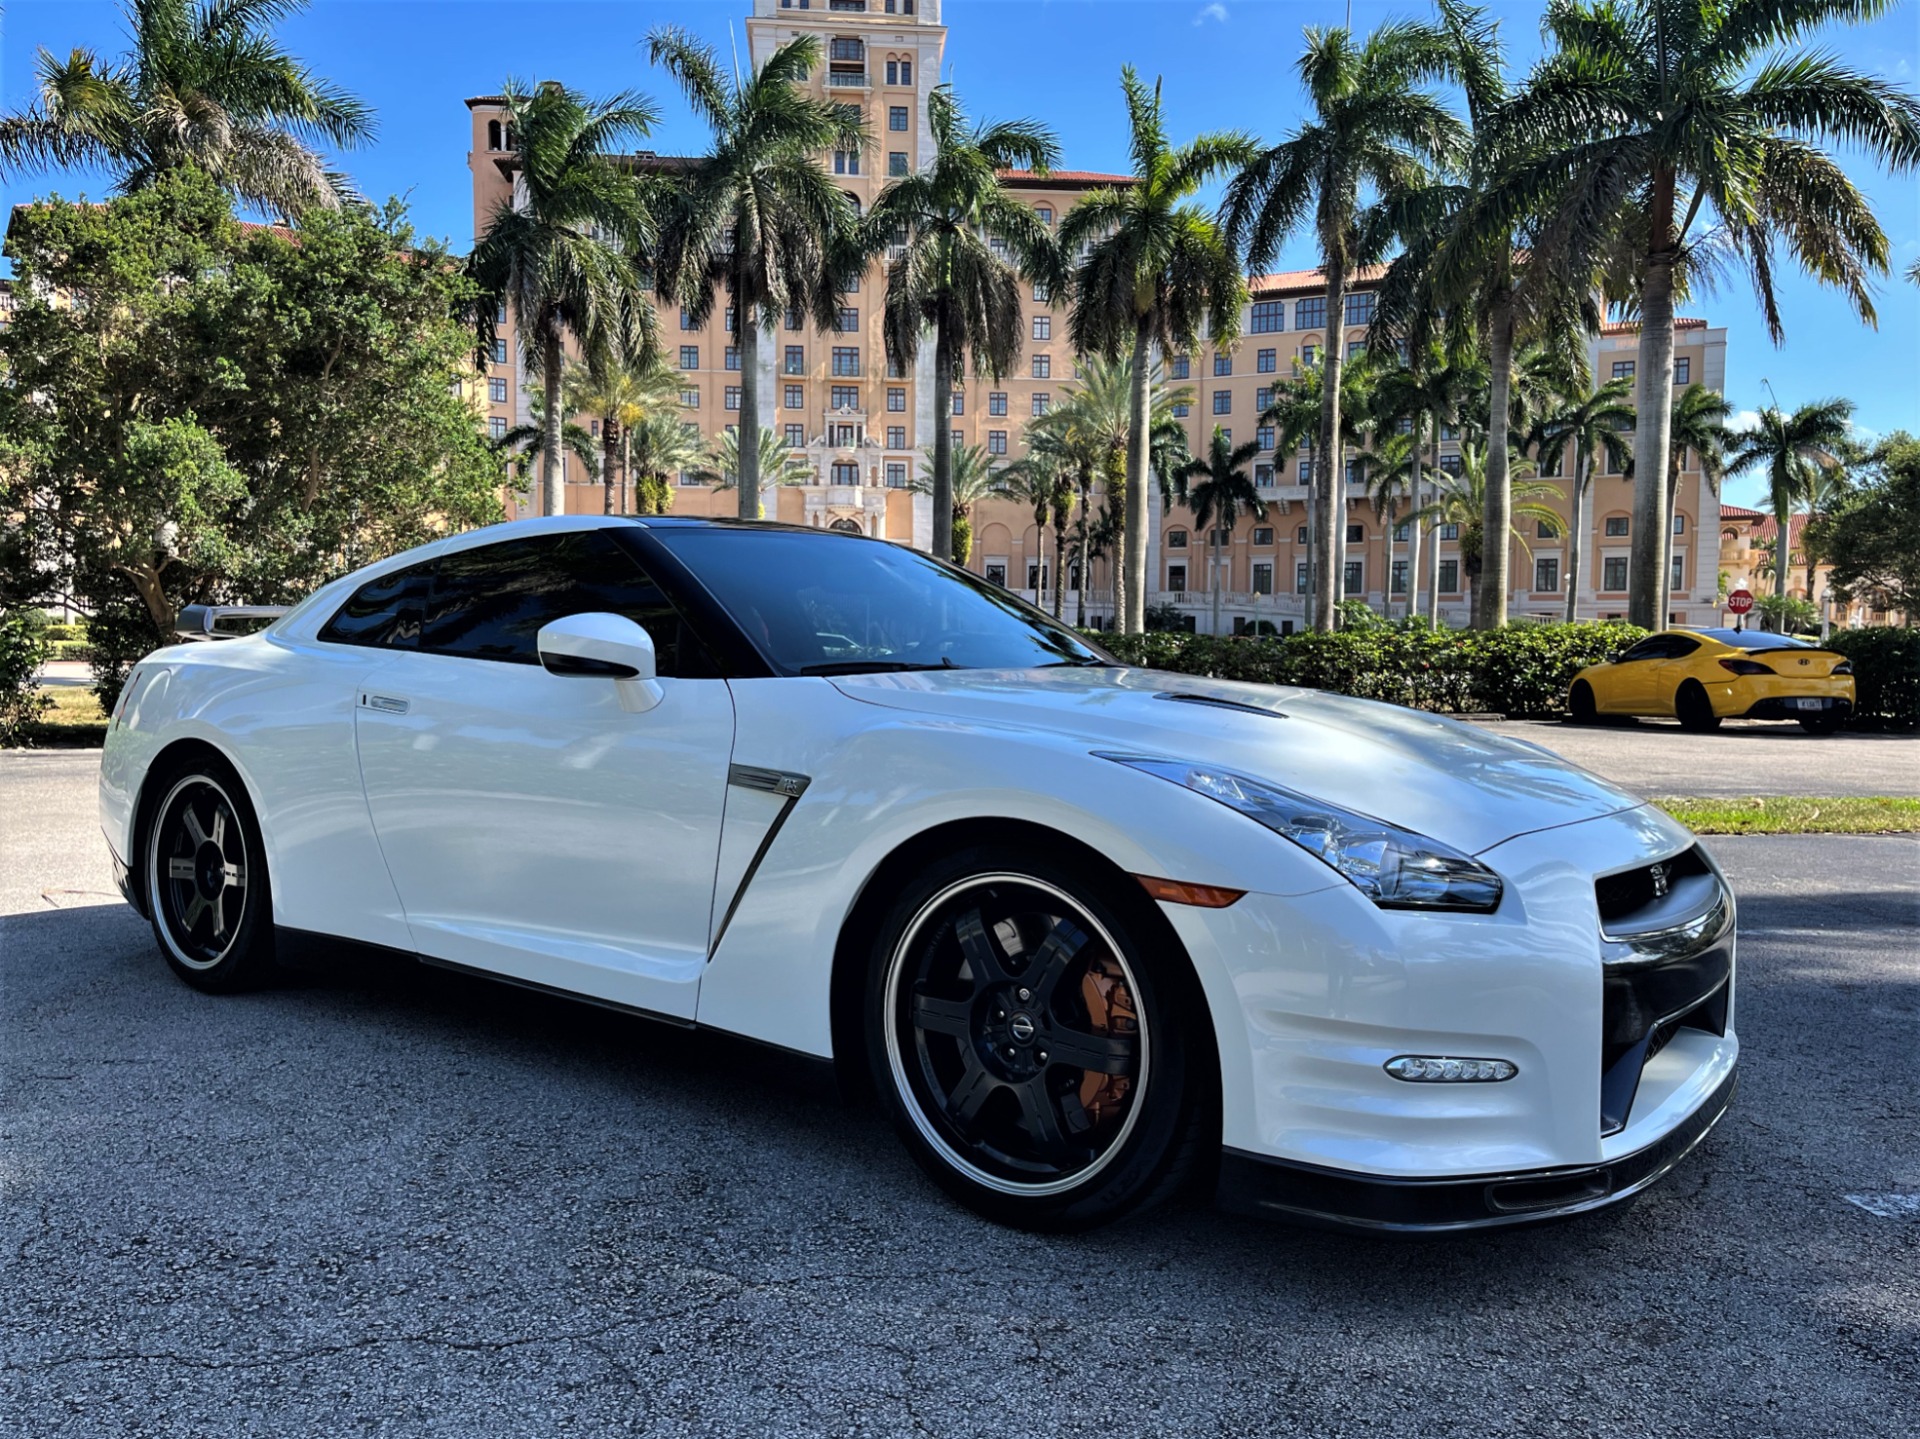 Used 2014 Nissan GT-R Track Edition for sale $109,850 at The Gables Sports Cars in Miami FL 33146 2